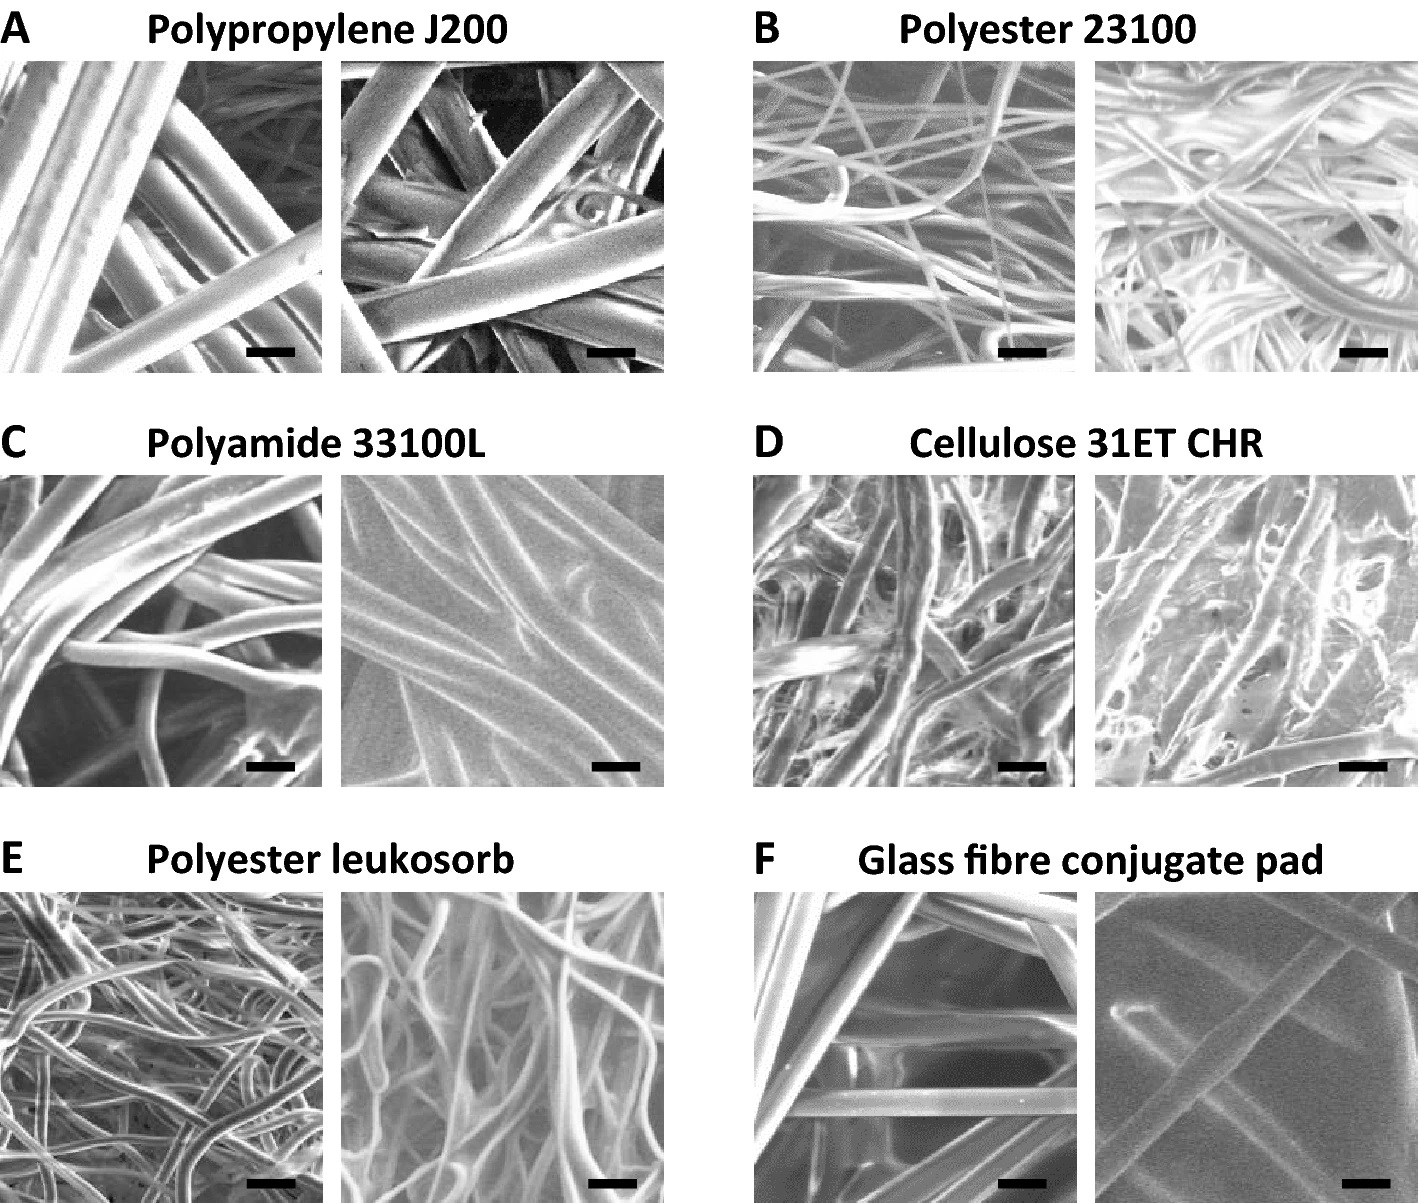 The physical appearance of fibres and sugar glass formed in nonwoven matrices. Scanning electron microscopy images of six different matrices at × 1,000 magnification. Within each panel, the left-hand image shows empty matrices and the right-hand image shows fibres after loading and drying of 0.5 M (80:20) trehalose:sucrose solution. Scale bar shows 20 µm in each image. ©  Vax-Hub